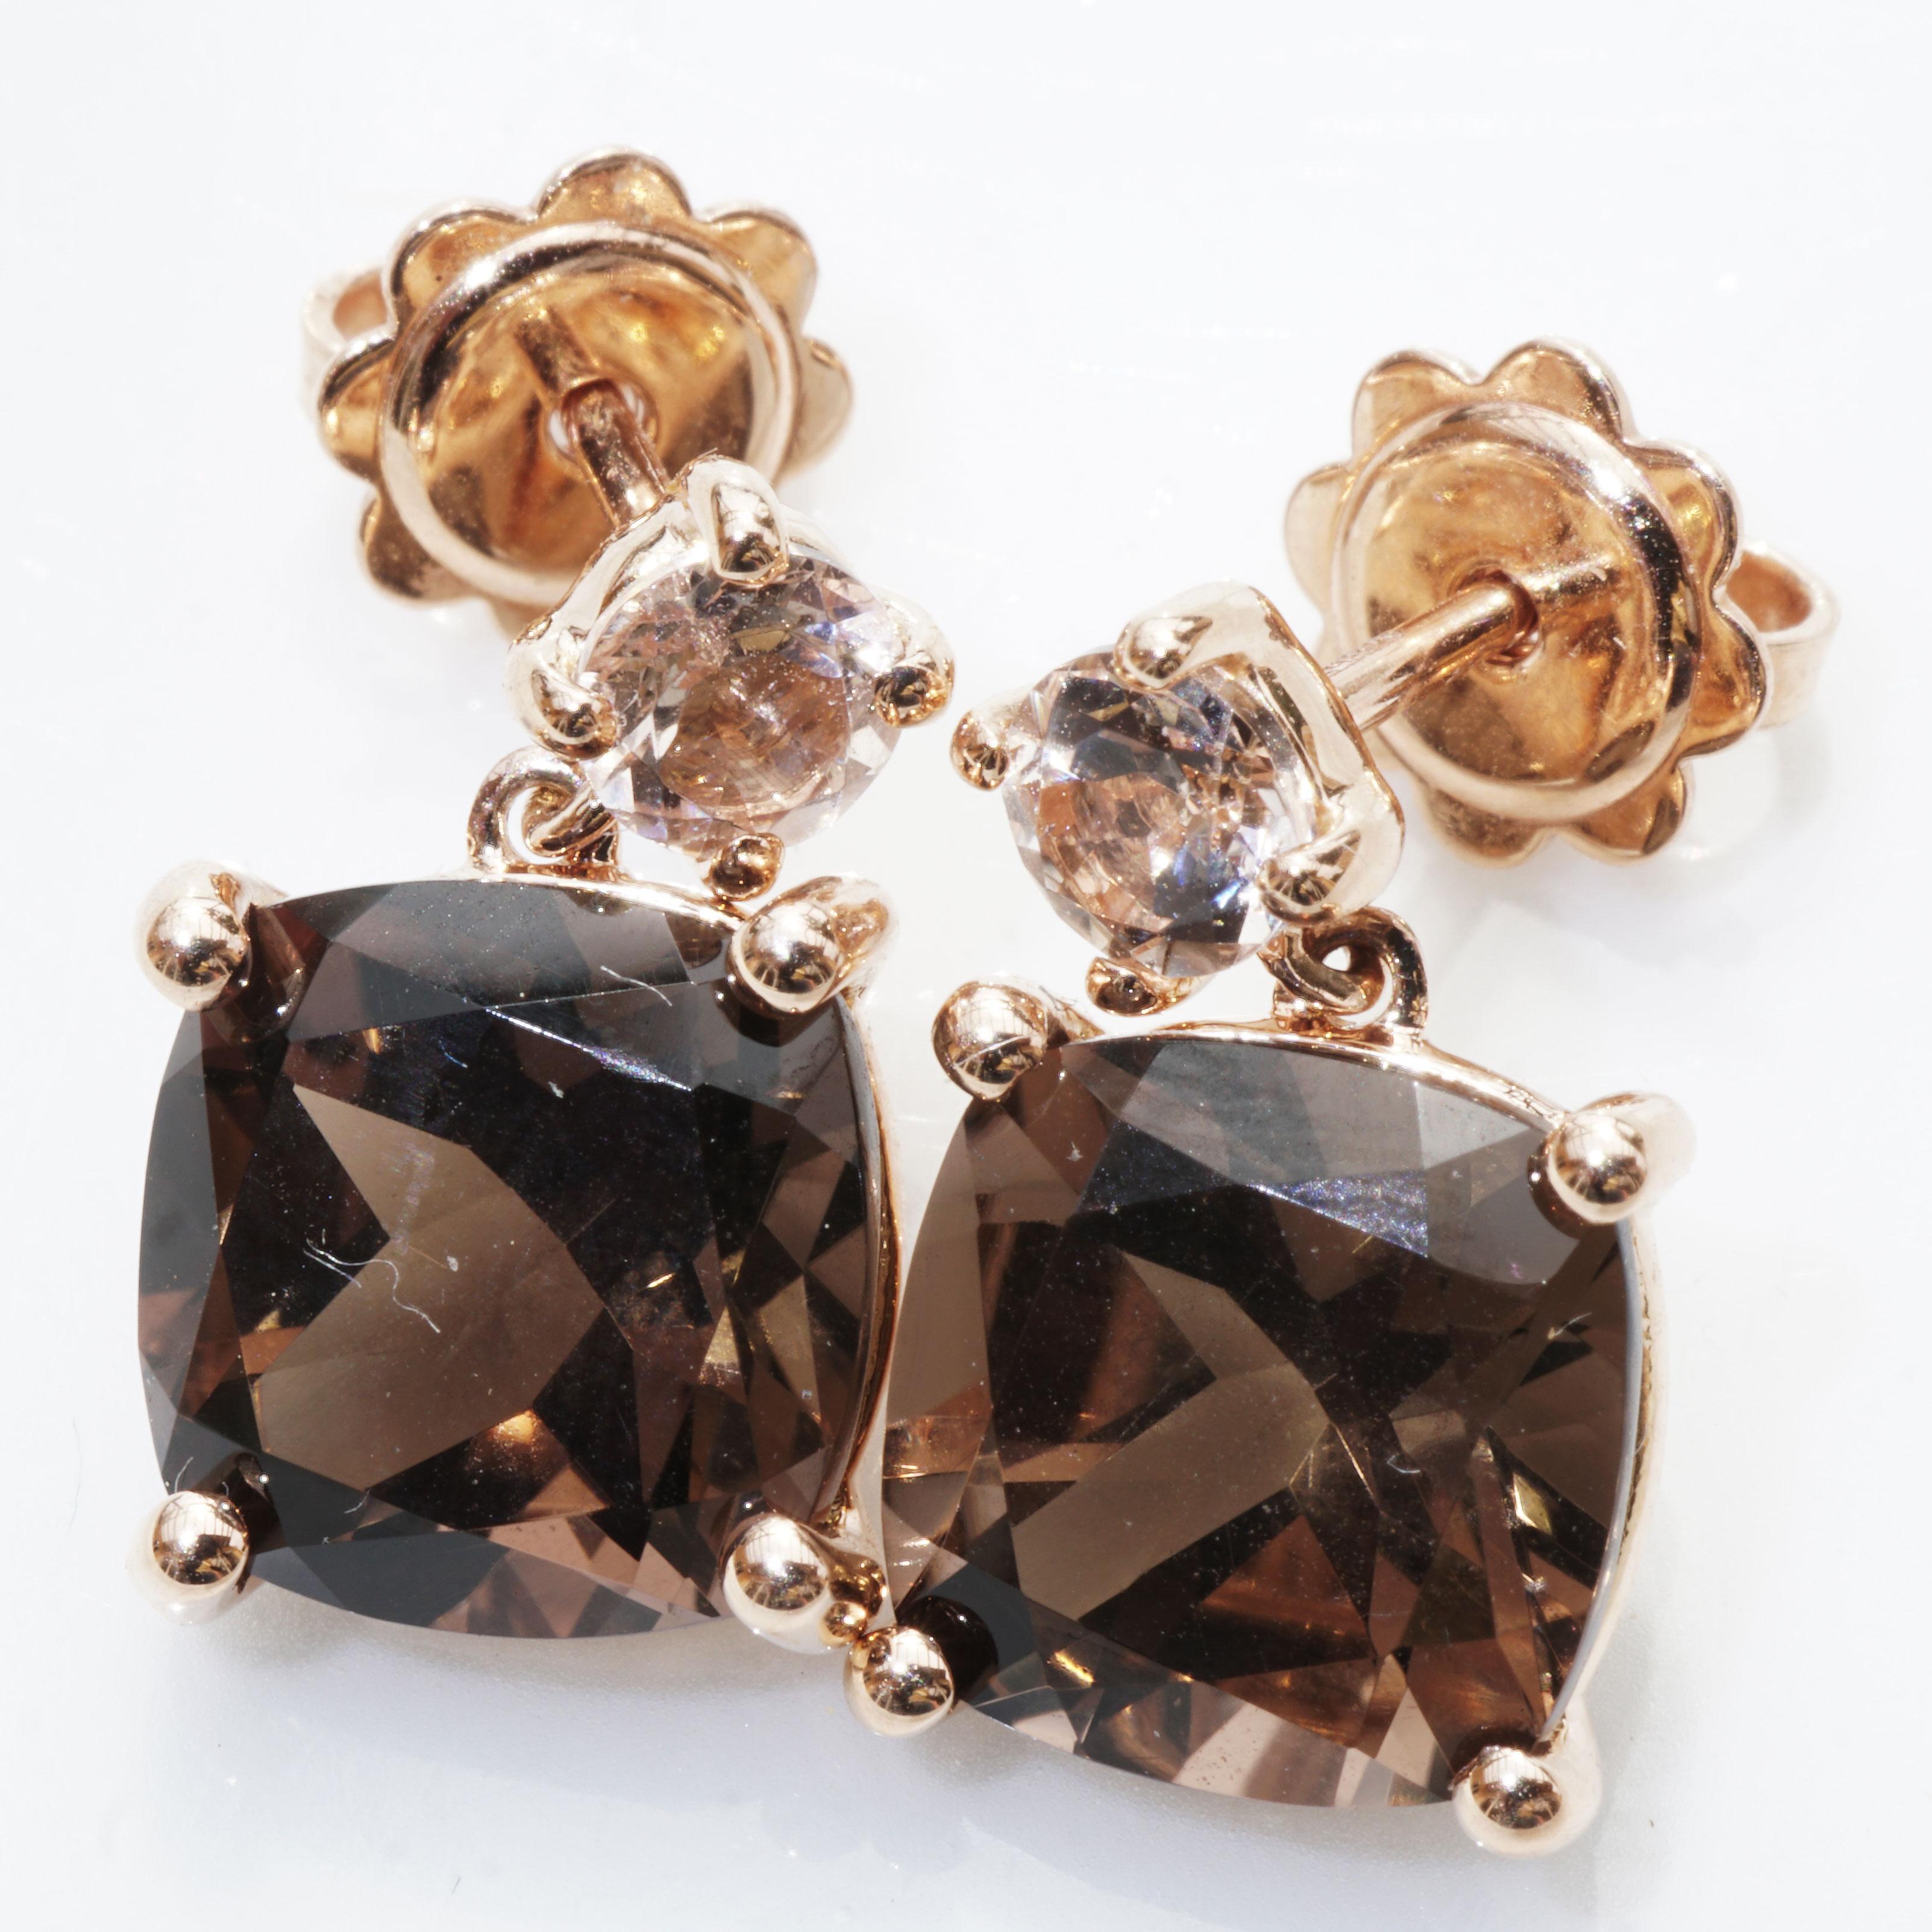 Earstuds high quality made in an italian traditional goldsmith in Valenza, modern design, each one in oval facetted smoky quartz total ca. 6 ct, held by 4 modern crabs and a ear stud suspension each with a light pink colored fine morganite total ca.